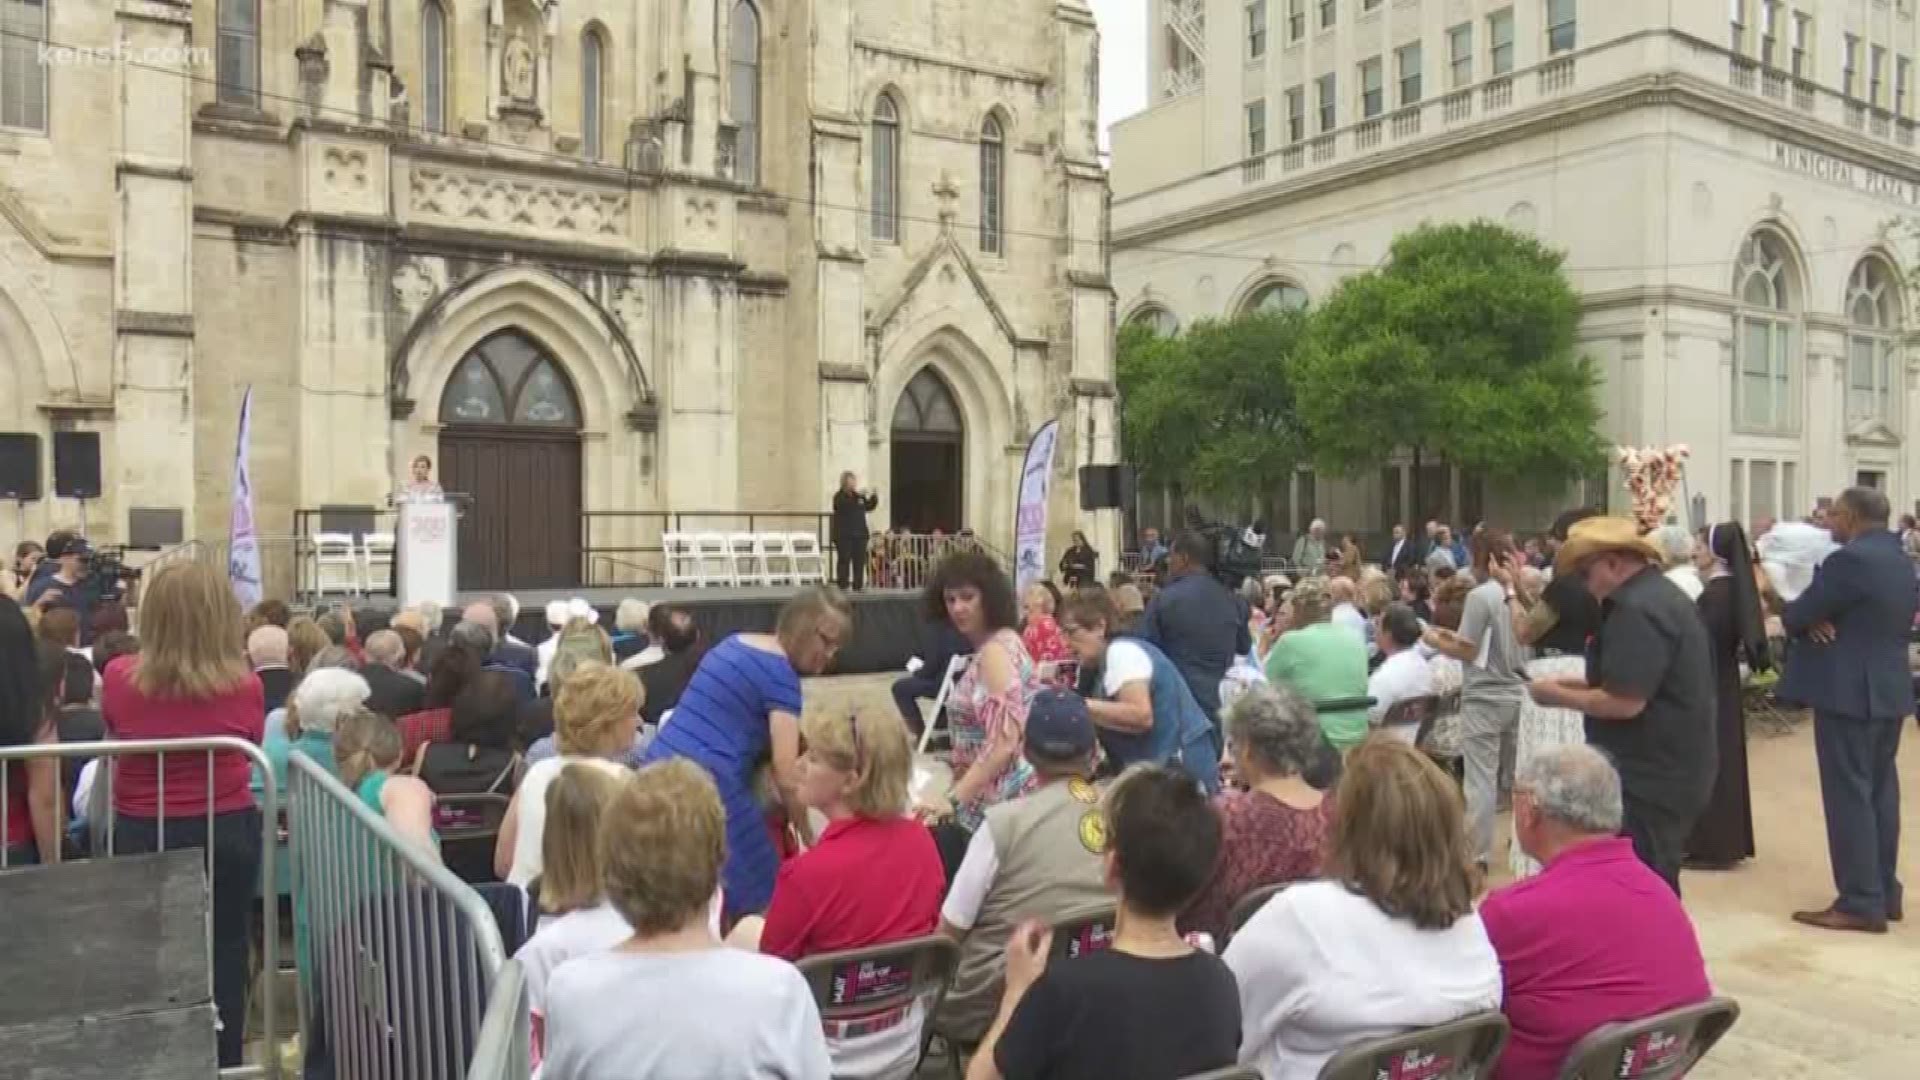 Tuesday night, the city kicked off a week of festivities commemorating our tricentennial at Main Plaza. Eyewitness News anchor Deborah Knapp is live.